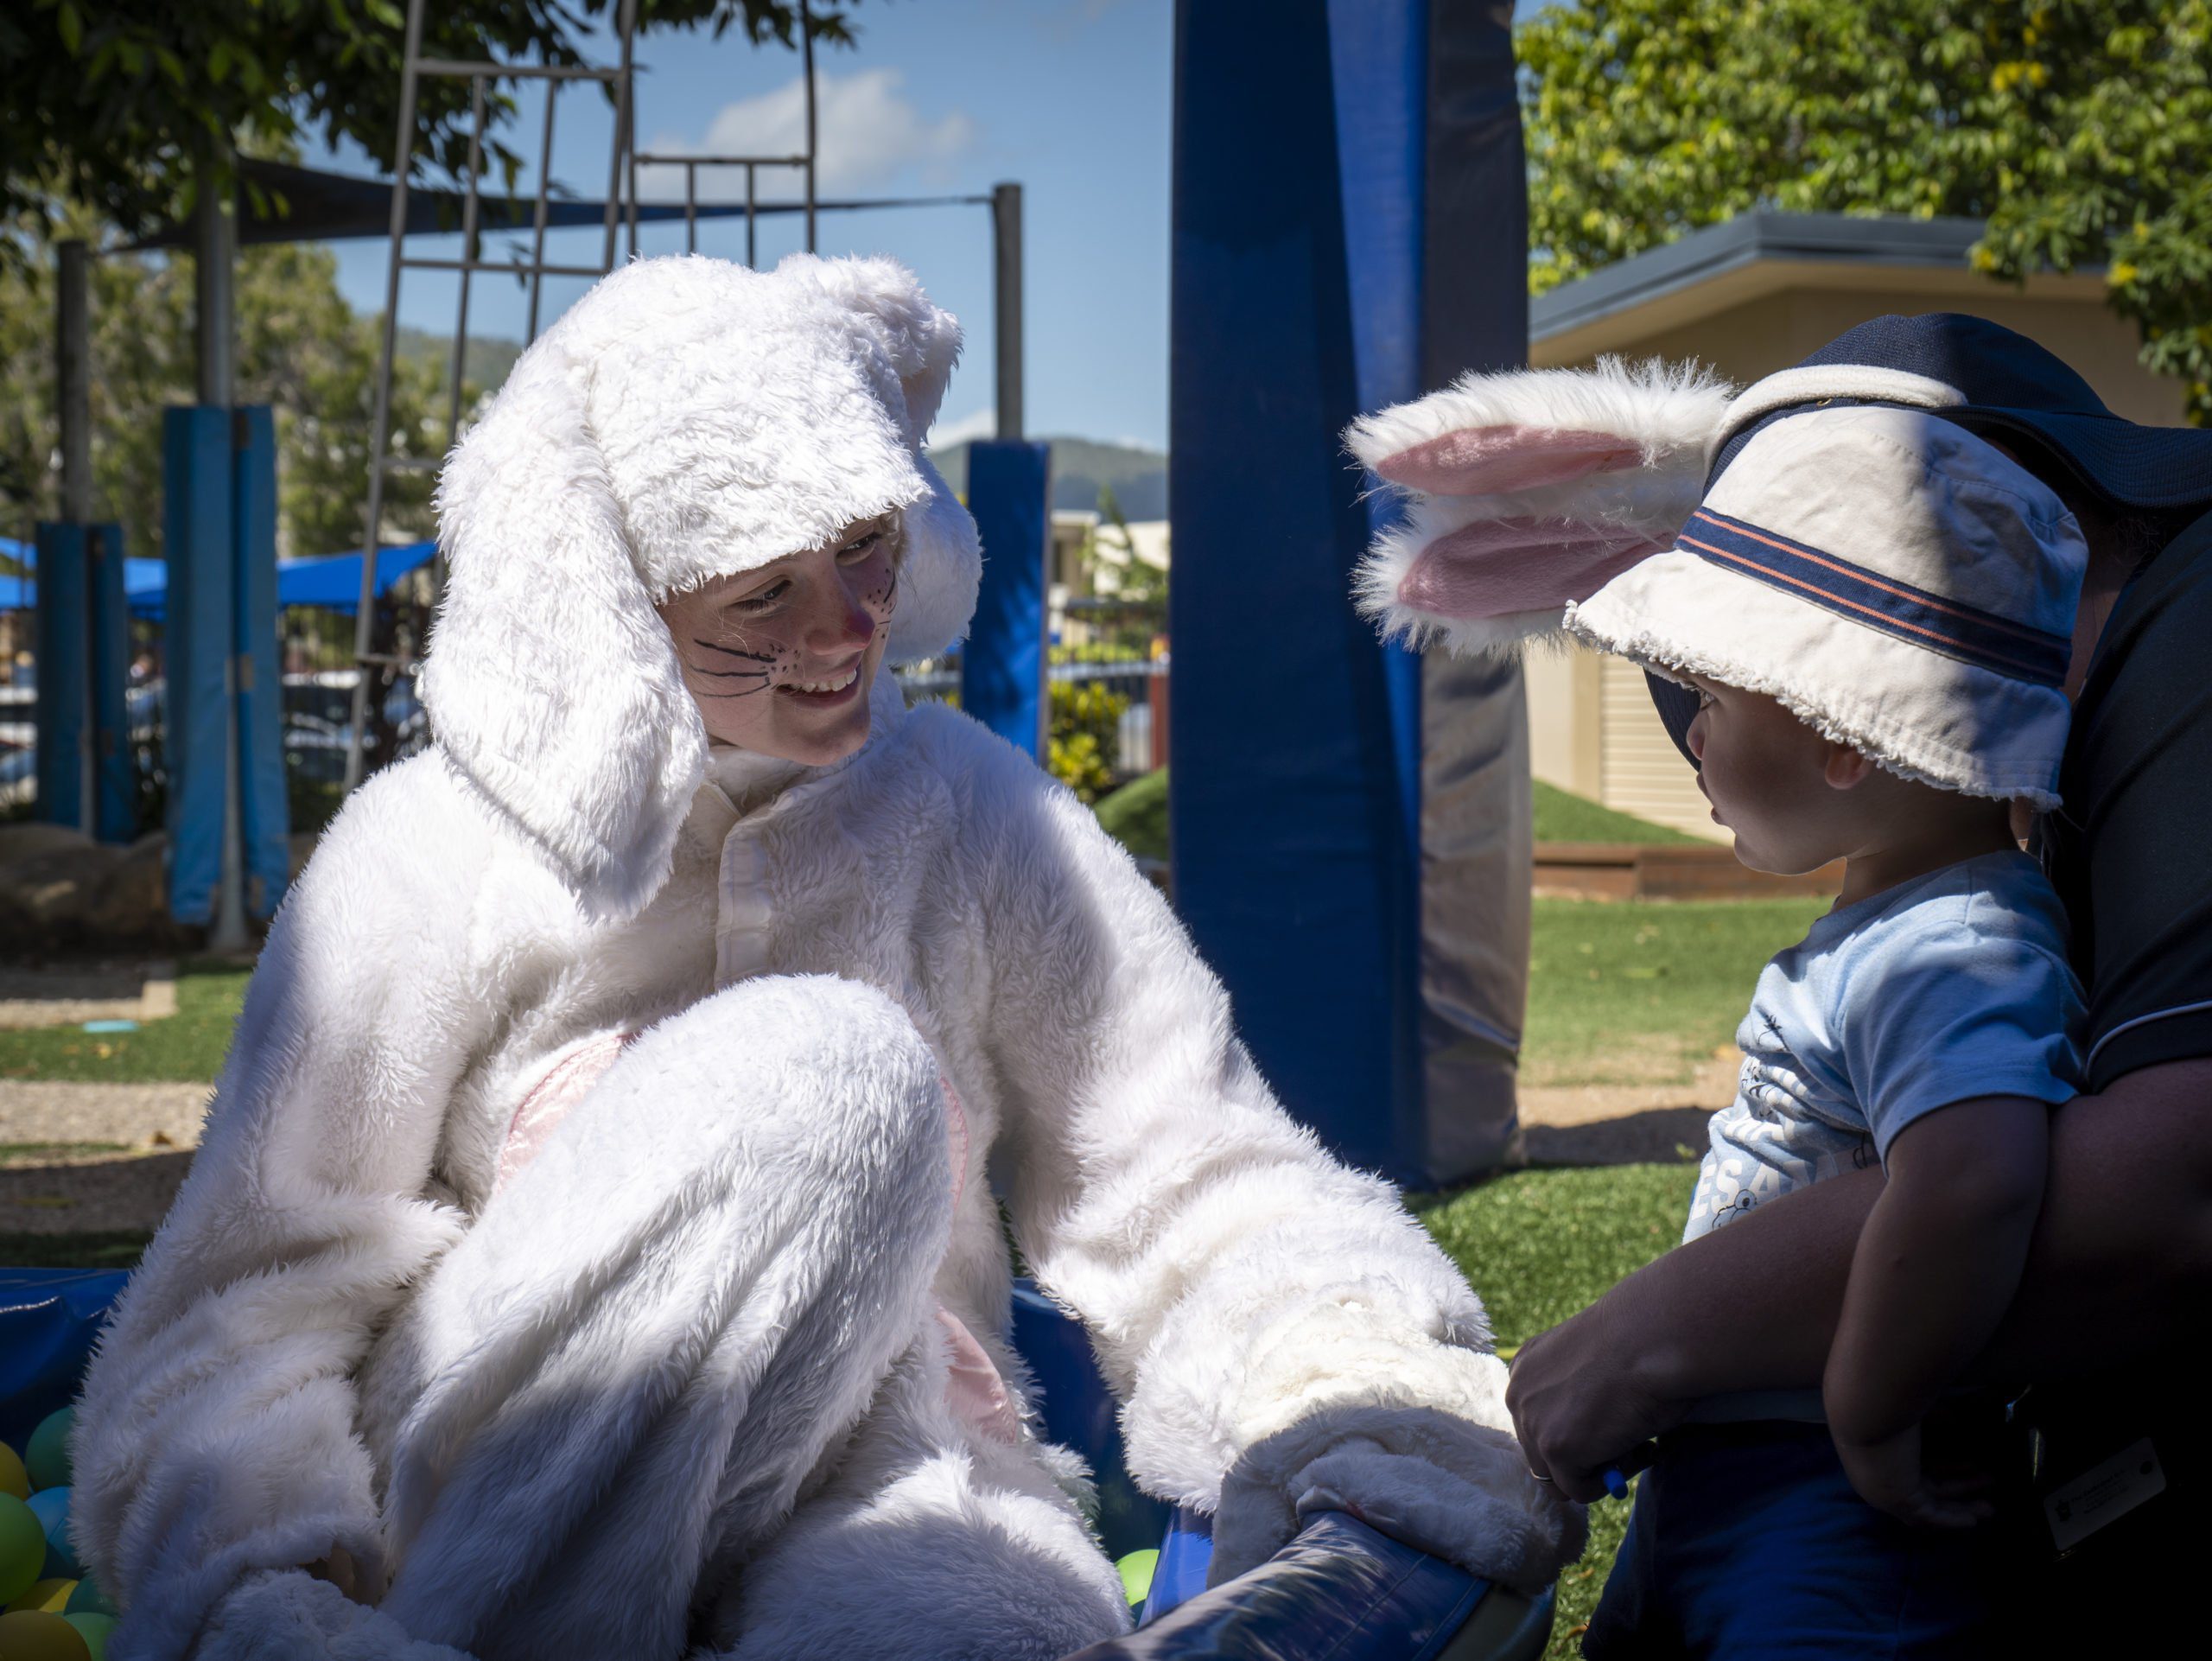 Leos Club Easter Surprise - The Cathedral School